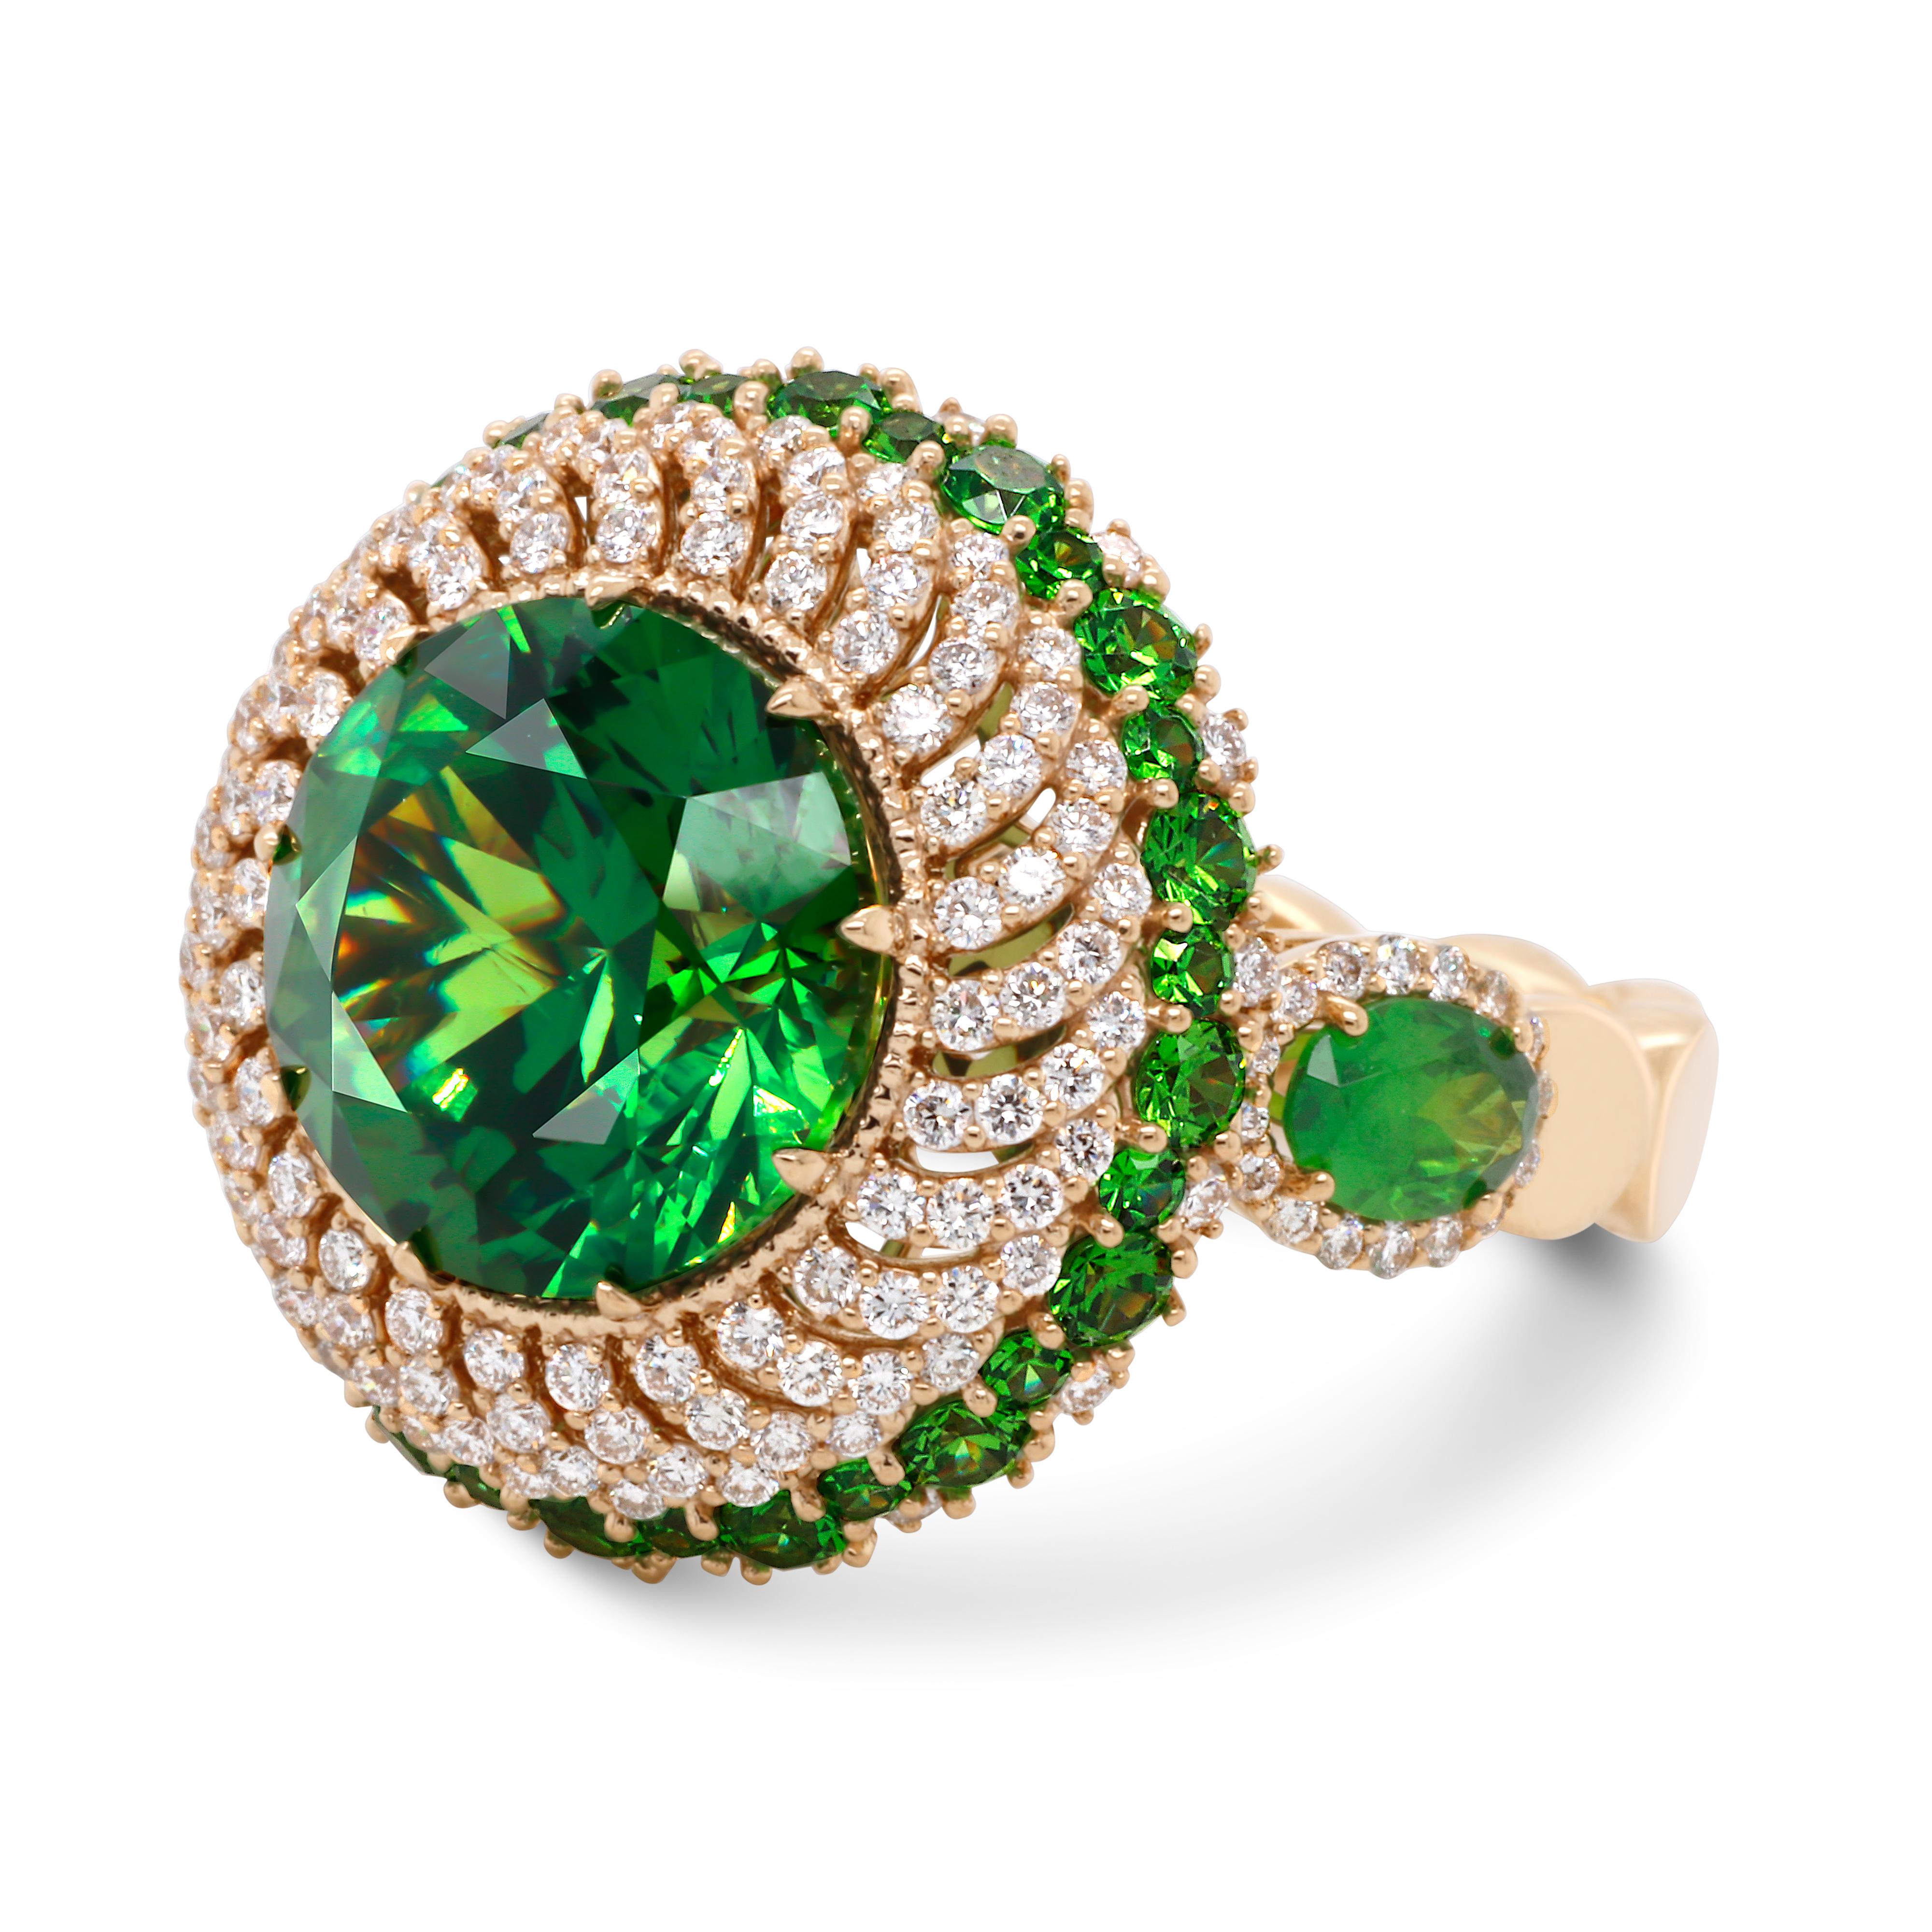 18 Karat Gold Ring featuring rare world-class 5.82 ct Russian Demantoid which is complimented with round brilliant-cut Demantoids 0.8ctw, sparkling colorless Diamonds 0.64 ctw and two oval cut 0.57ctw Russian Demantoids. 
Demantoid is the rarest